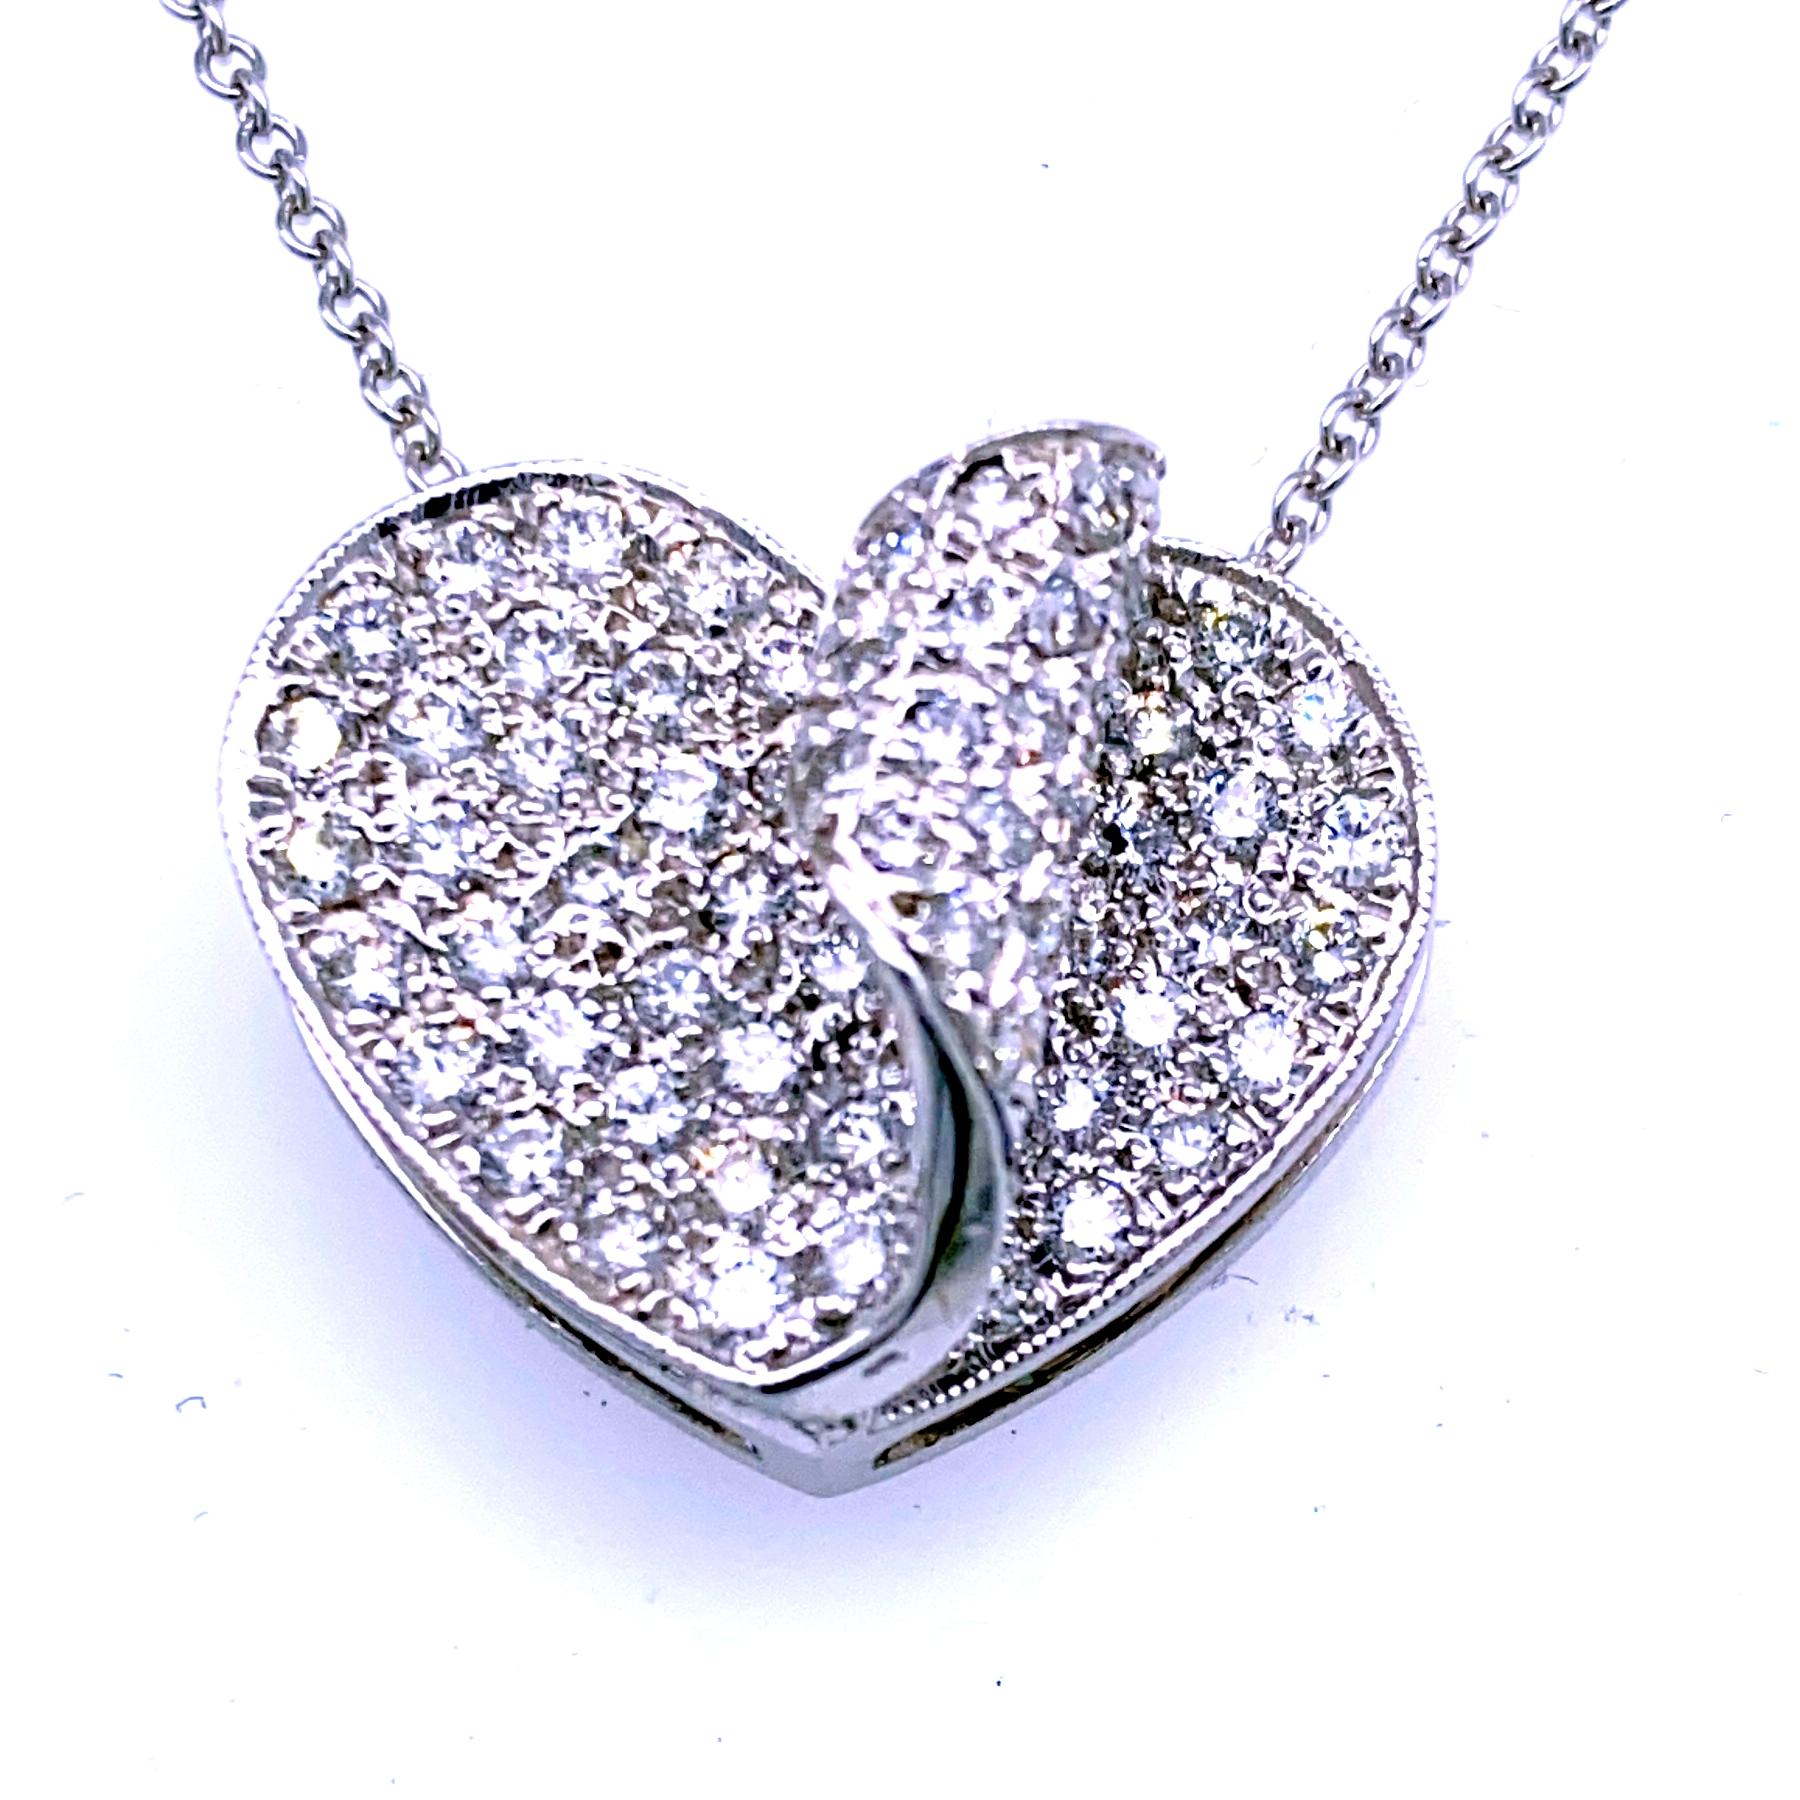 14K Gold Pave Set Diamond Heart Shape Leaf Pendant  with total weight of 1.11 Ct. 
Total Diamond Weight: 1.11 Ct
Total Necklace Weight: 7 gr
Pendant Size 20x17 mm - 9.5 mm Thickness
Chain Not included